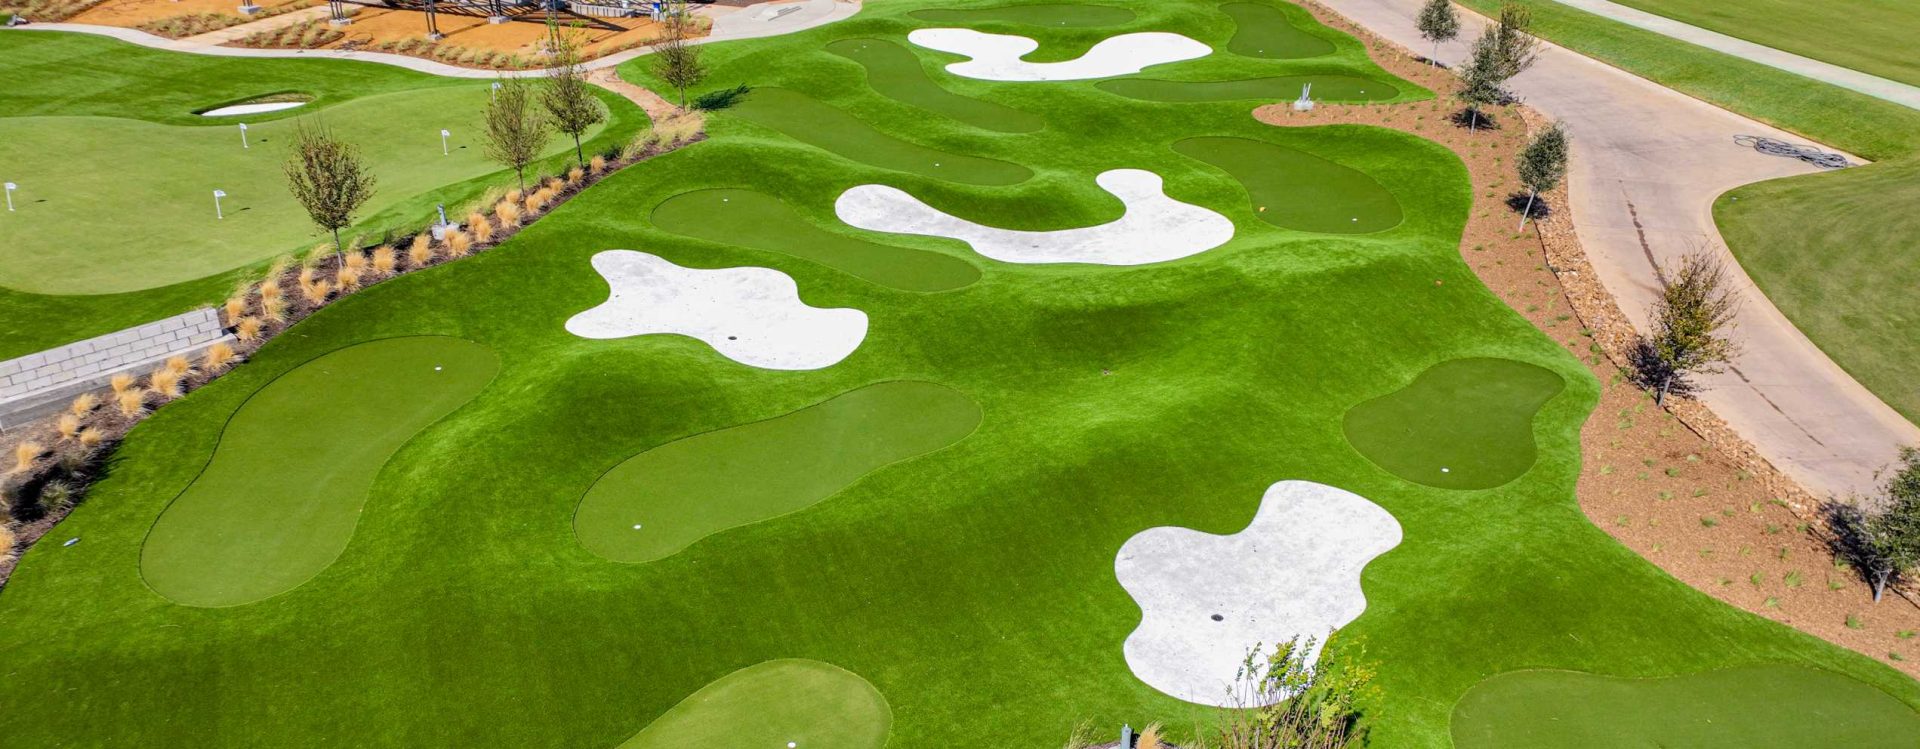 Golf course built with obstacles and artificial grass